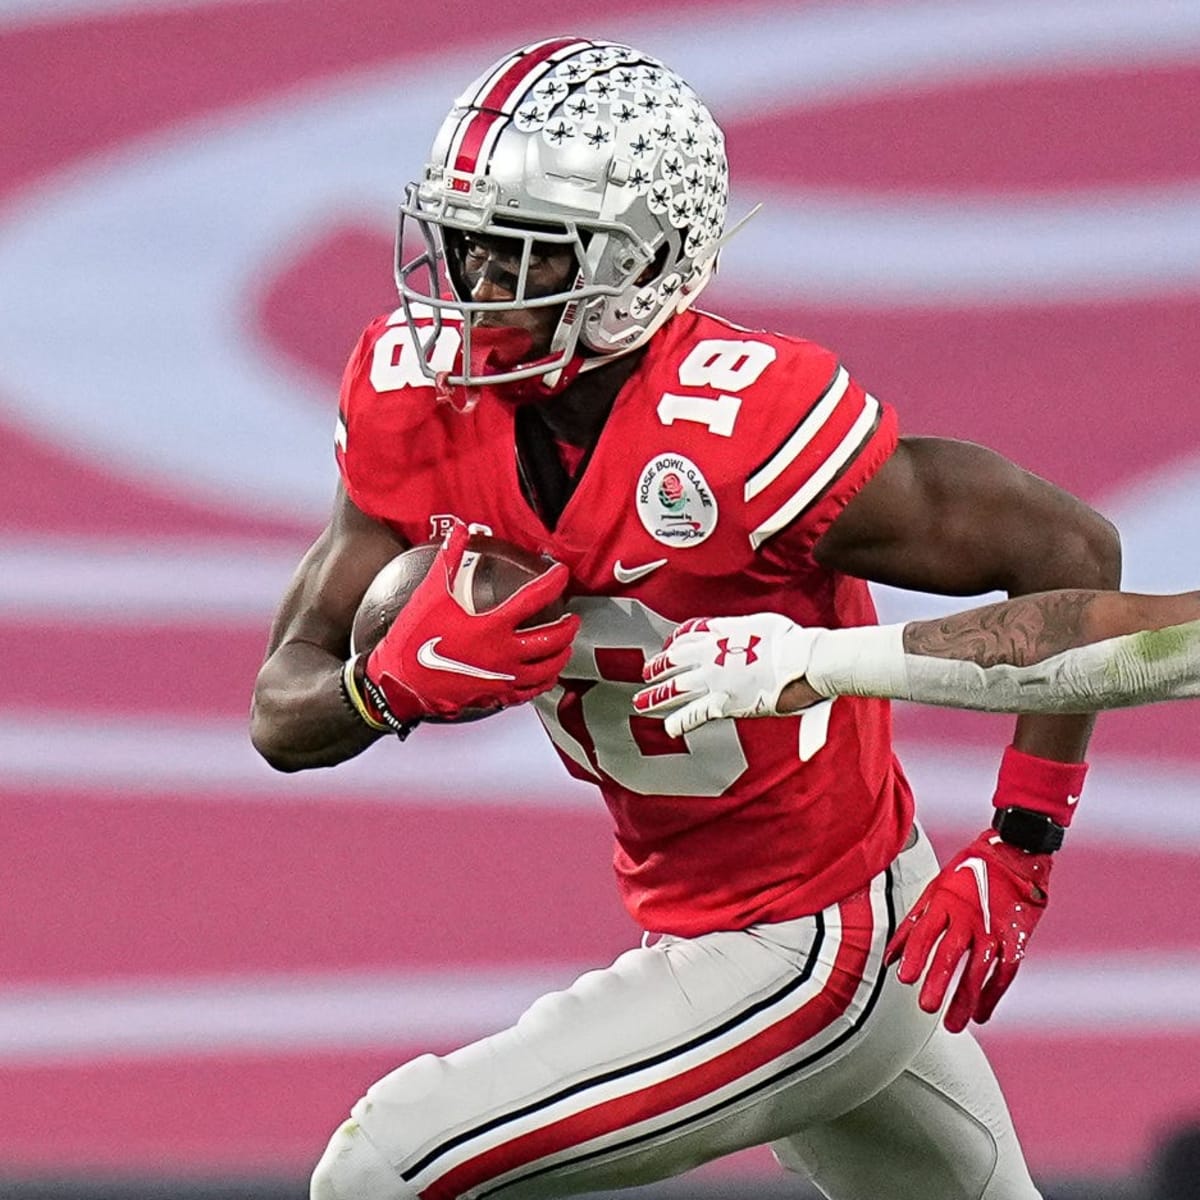 Player to Watch: Ohio State's Marvin Harrison Jr. is already a